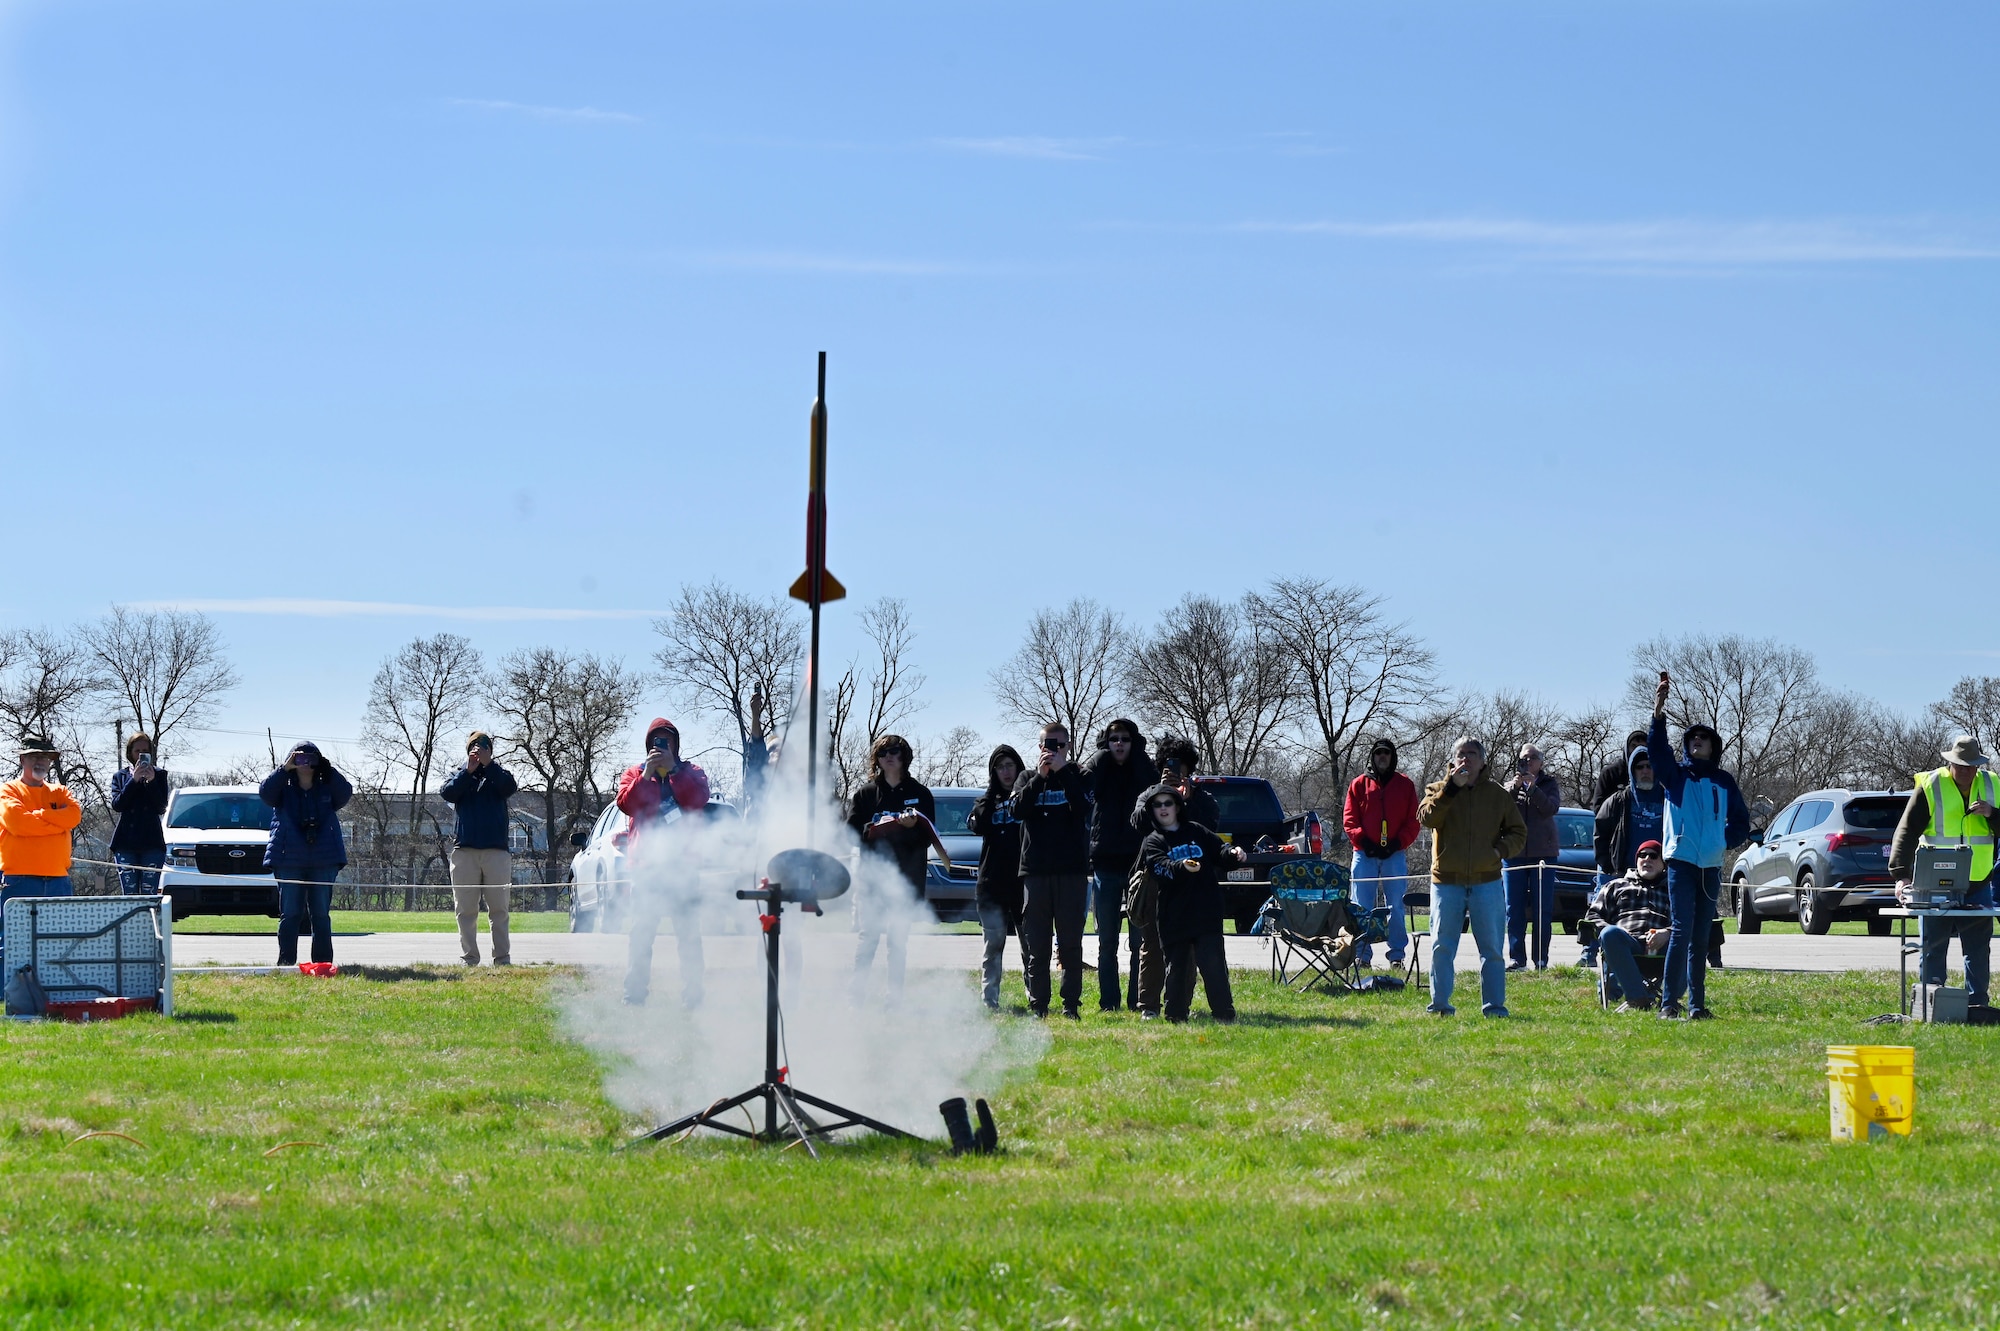 Members of the National Museum of the US Air Force ARC Rocketry Team launch rockets in preparation for the upcoming competition.